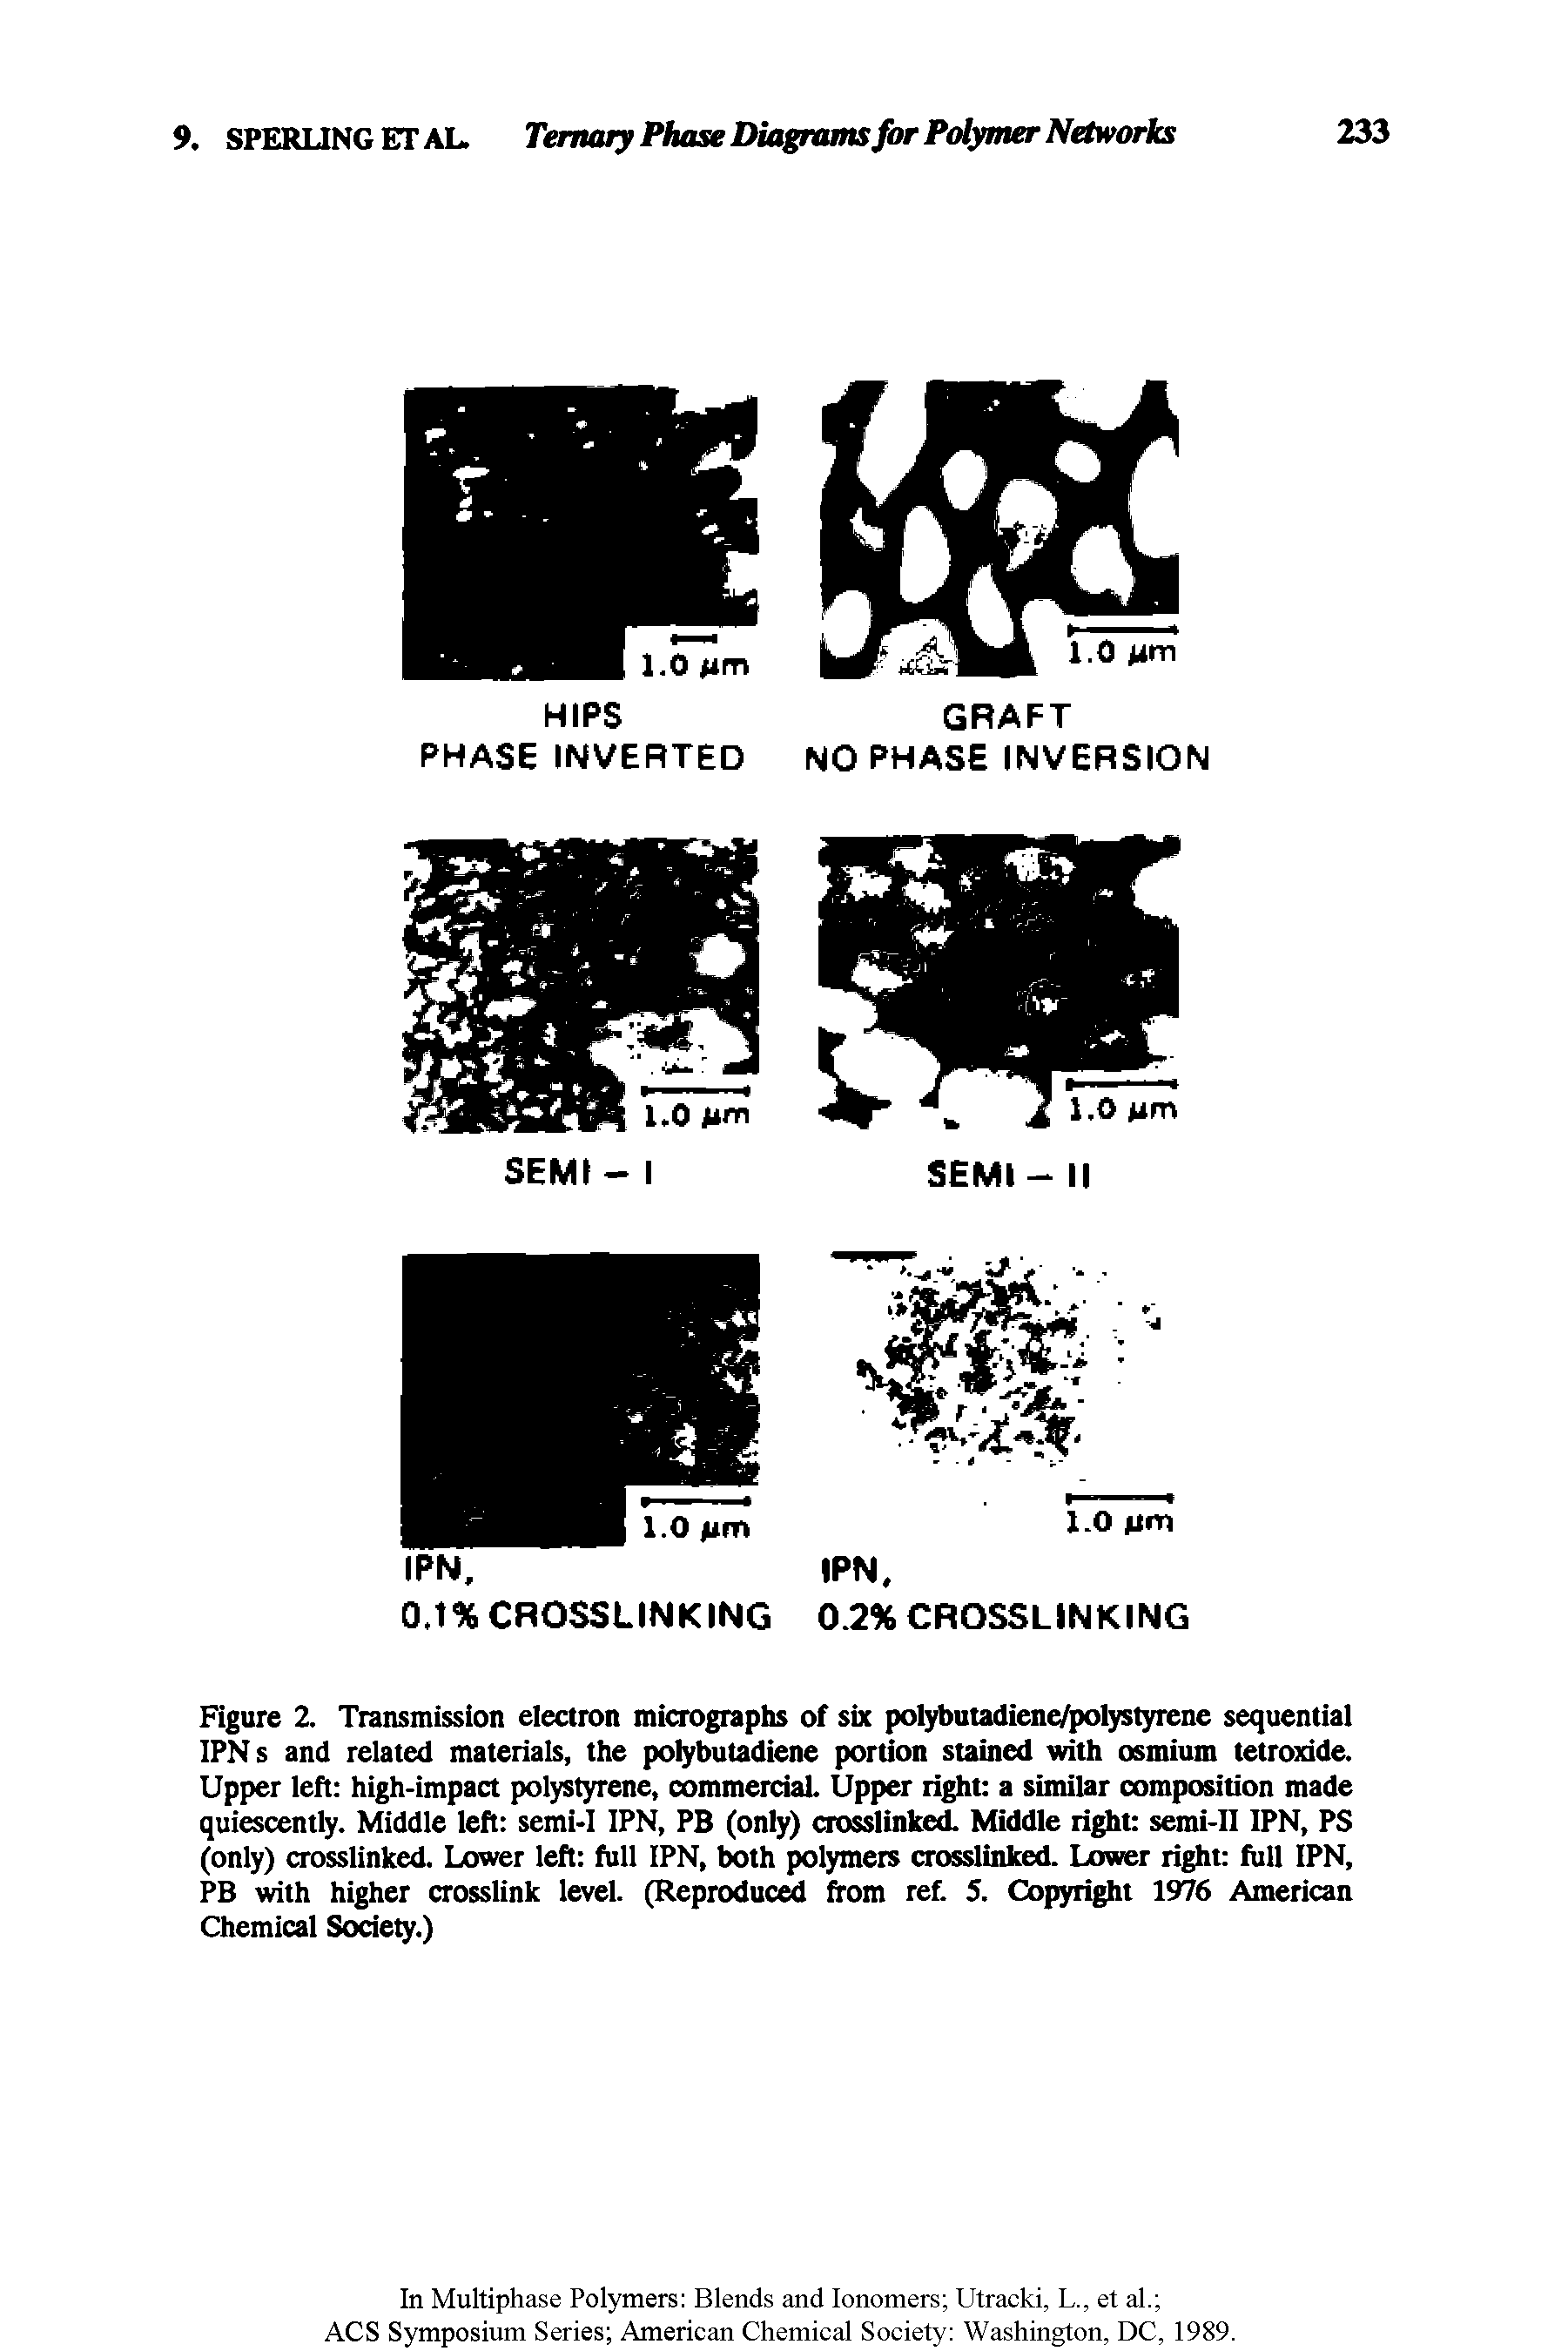 Figure 2. Transmission electron micrographs of six polybutadiene/polystyrene sequential IPN s and related materials, the polybutadiene portion stained with osmium tetroxide. Upper left high-impact polystyrene, commerciaL Upper right a similar composition made quiescently. Middle left semi-I IPN, PB (only) crosslinked. Middle right semi-II IPN, PS (only) crosslinked. Lower left full IPN, both polymers crosslinked. Lower right full IPN, PB with higher crosslink level. (Reproduce from ref. 5. Copyright 1976 American Chemical Society.)...